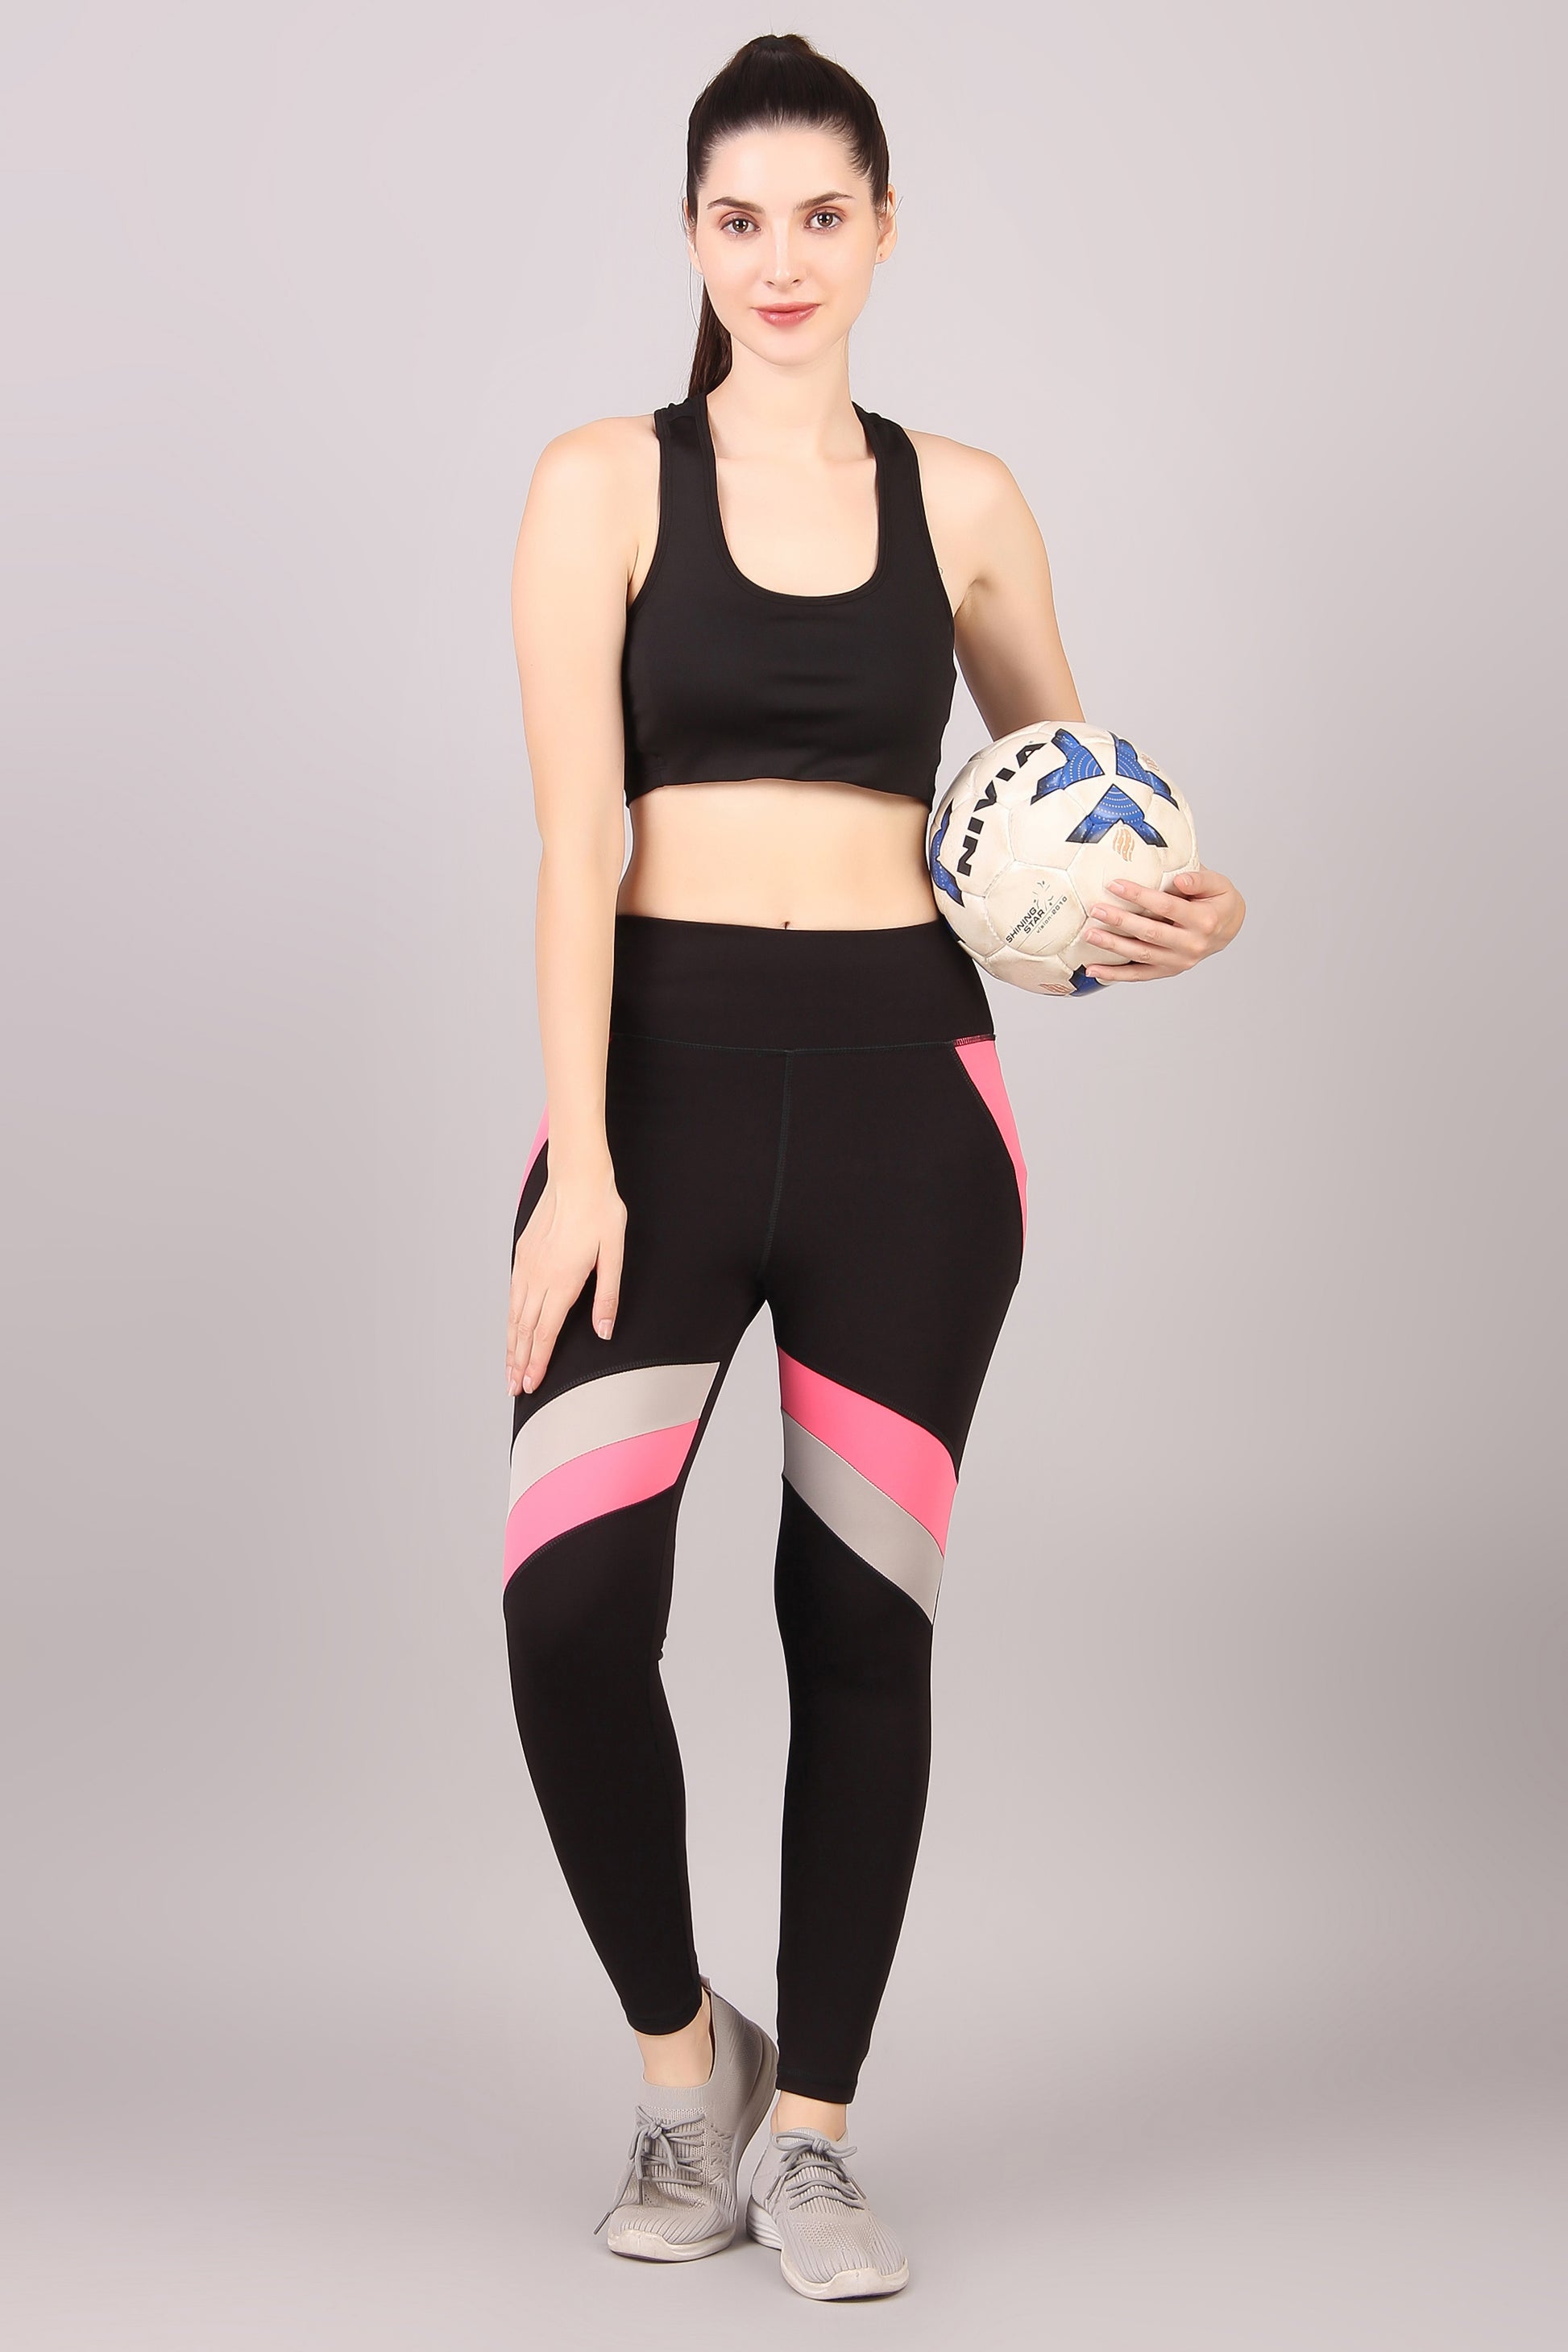 High Waisted Color Block Leggings, Tights With Great Support